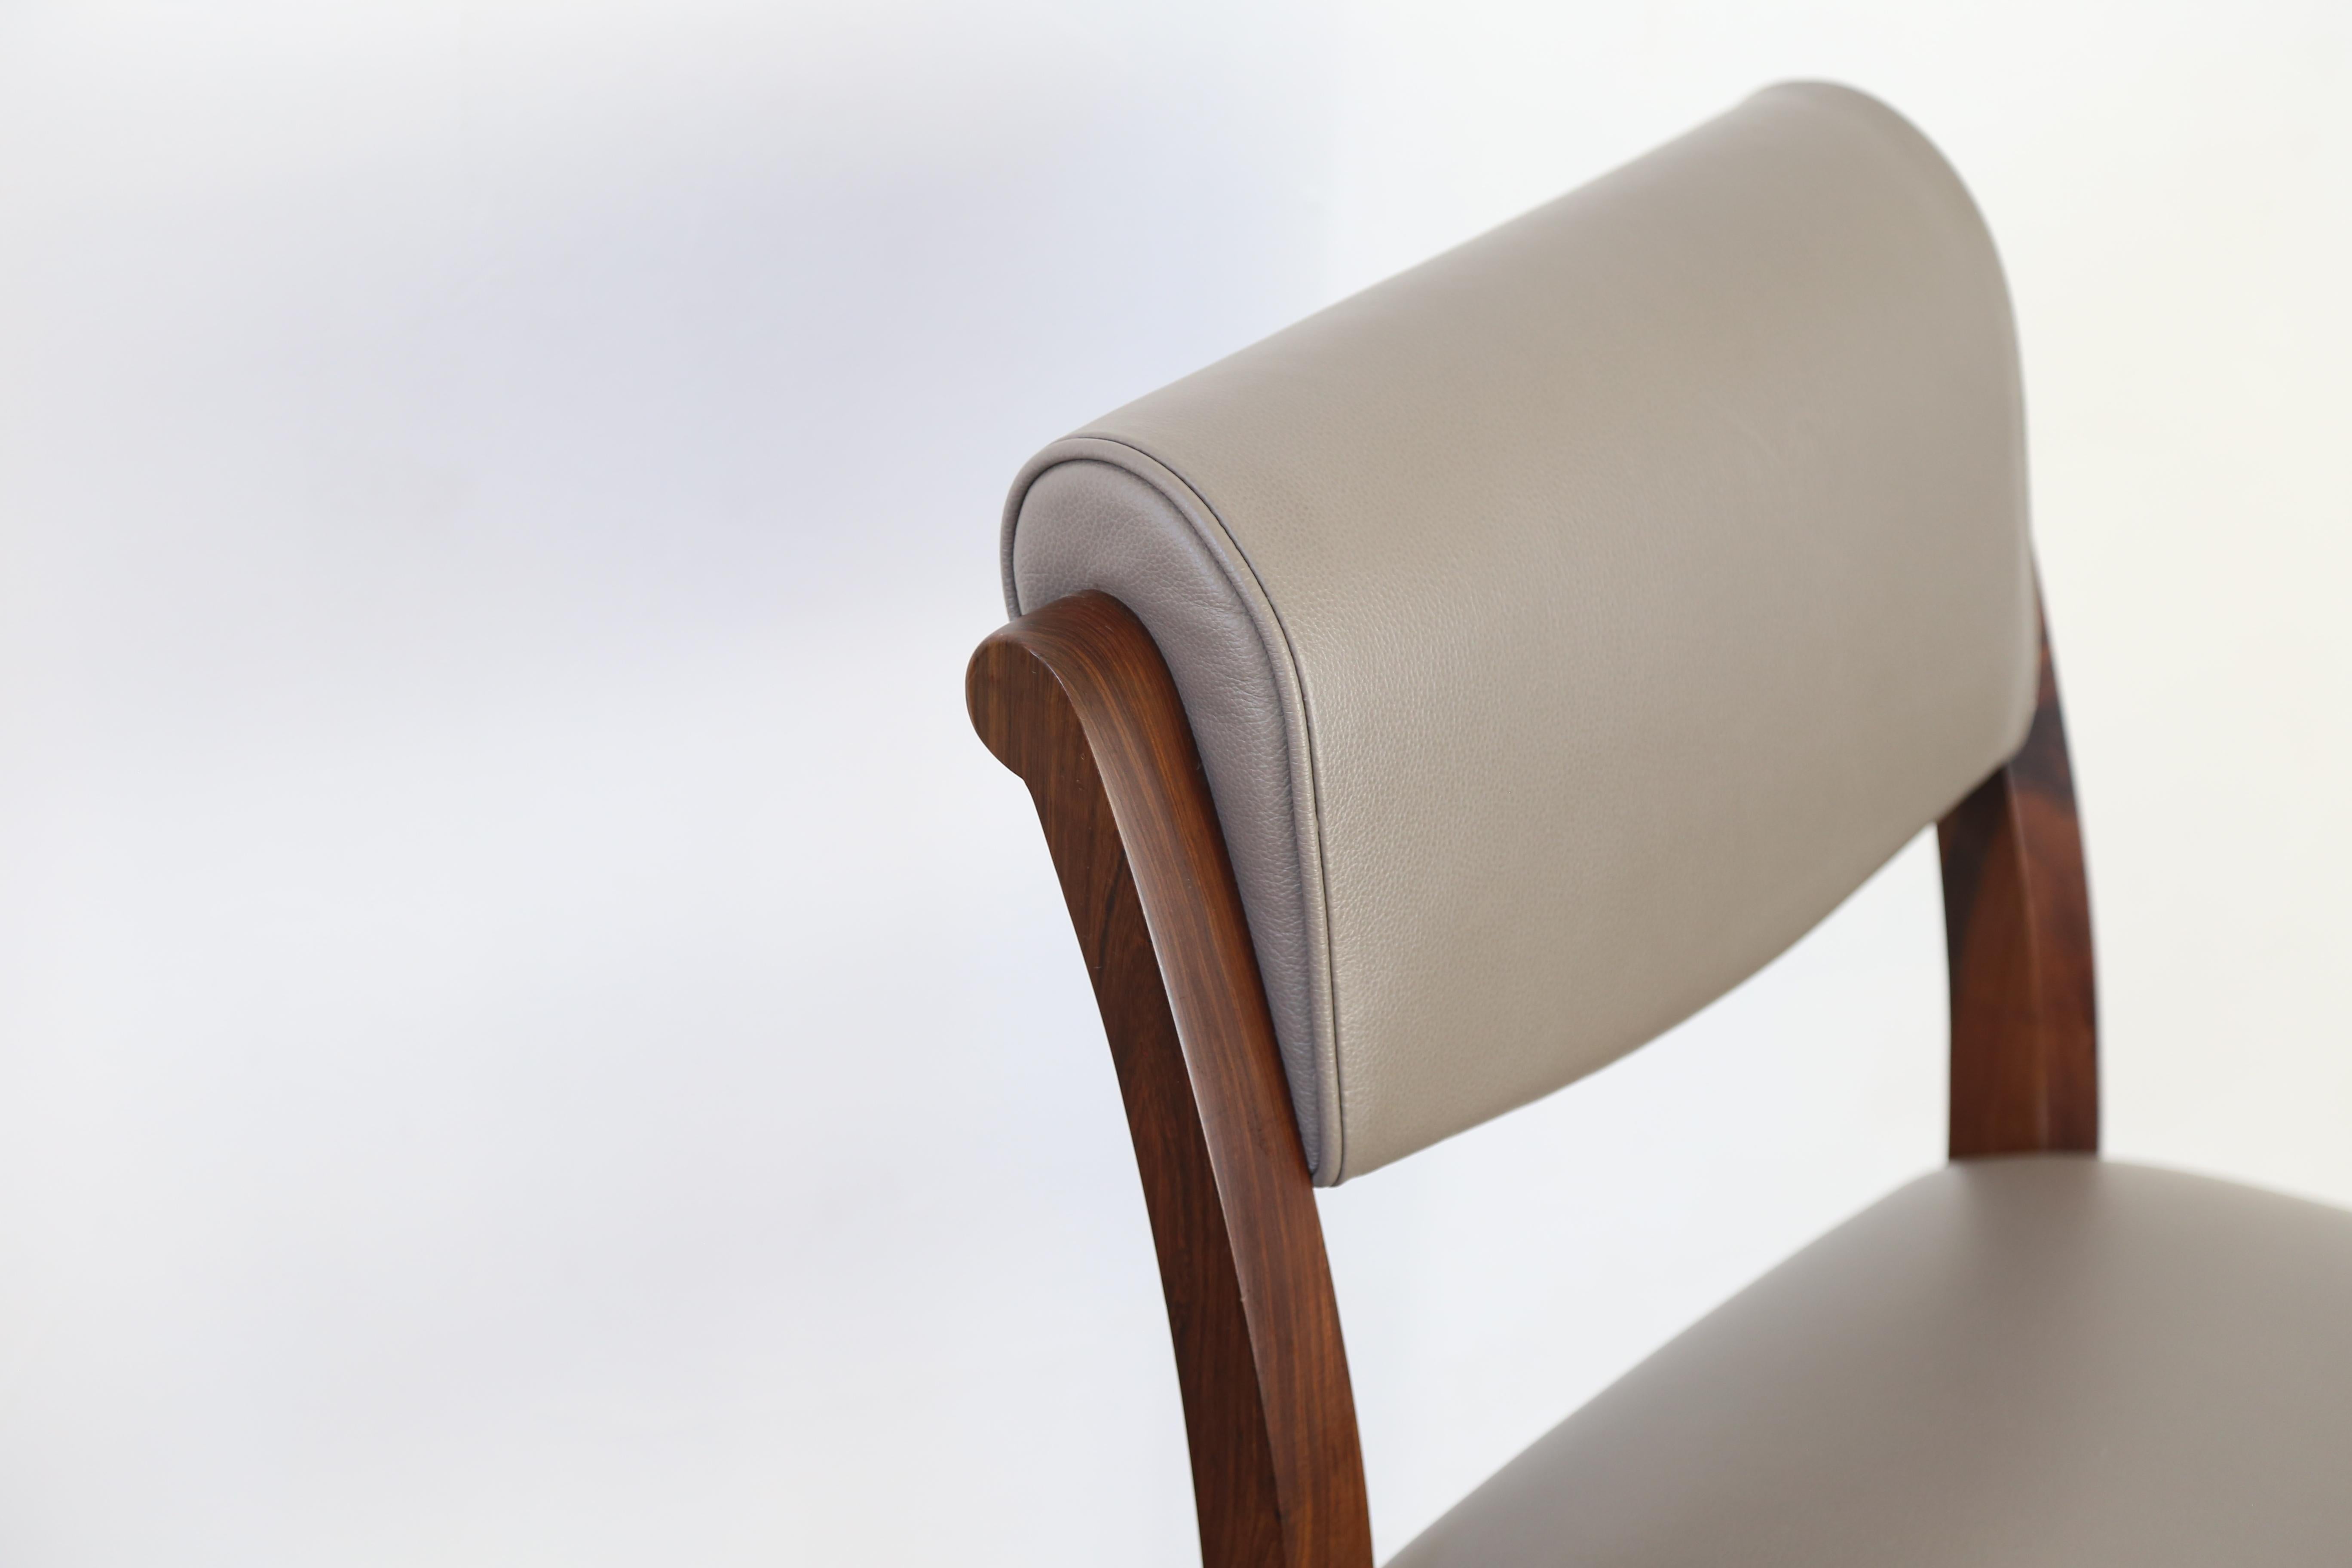 Costantini prides itself in using the hardest and most beautiful hardwoods in the construction of its line of seating. The Gianni dining chair pays homage to Art Deco styling and has a scrolled upholstered back and gently curved legs.

Available